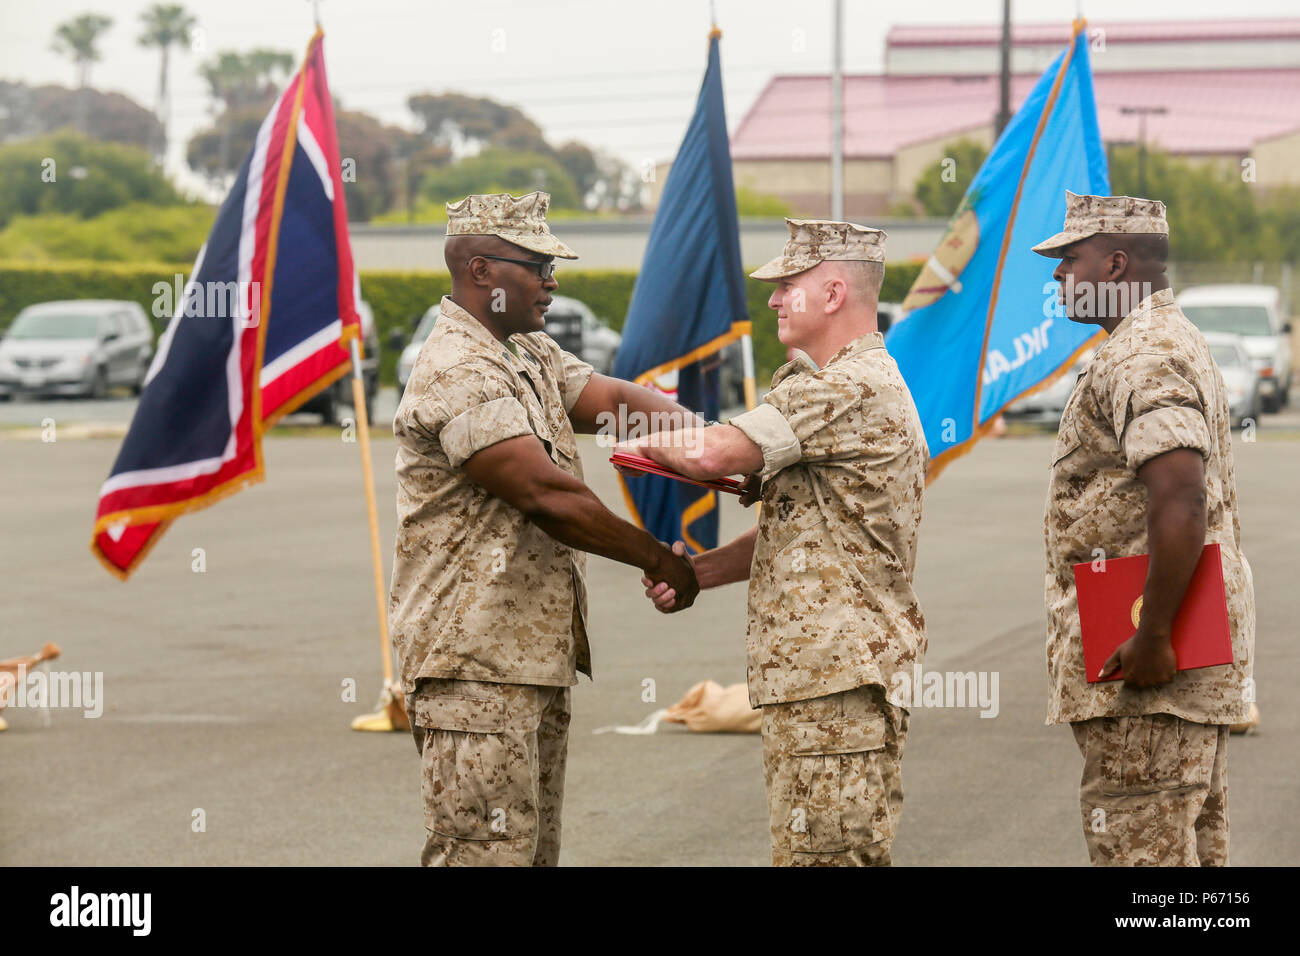 U.S. Marine Master Sgt. Gregory Byrd is presented with the fourth Navy Marine Cops Commendation Medal of his career by Col. James P. Fallon, 15th Marine Expeditionary Unit commanding officer, during Byrd’s retirement ceremony aboard Marine Corps Base Camp Pendleton, Calif., May 13, 2016.  Byrd received the award for his actions during the final tour of his 23 years of faithful service to Corps and country.  (U.S. Marine Corps photo by Sgt. Jamean R. Berry/Released) Stock Photo